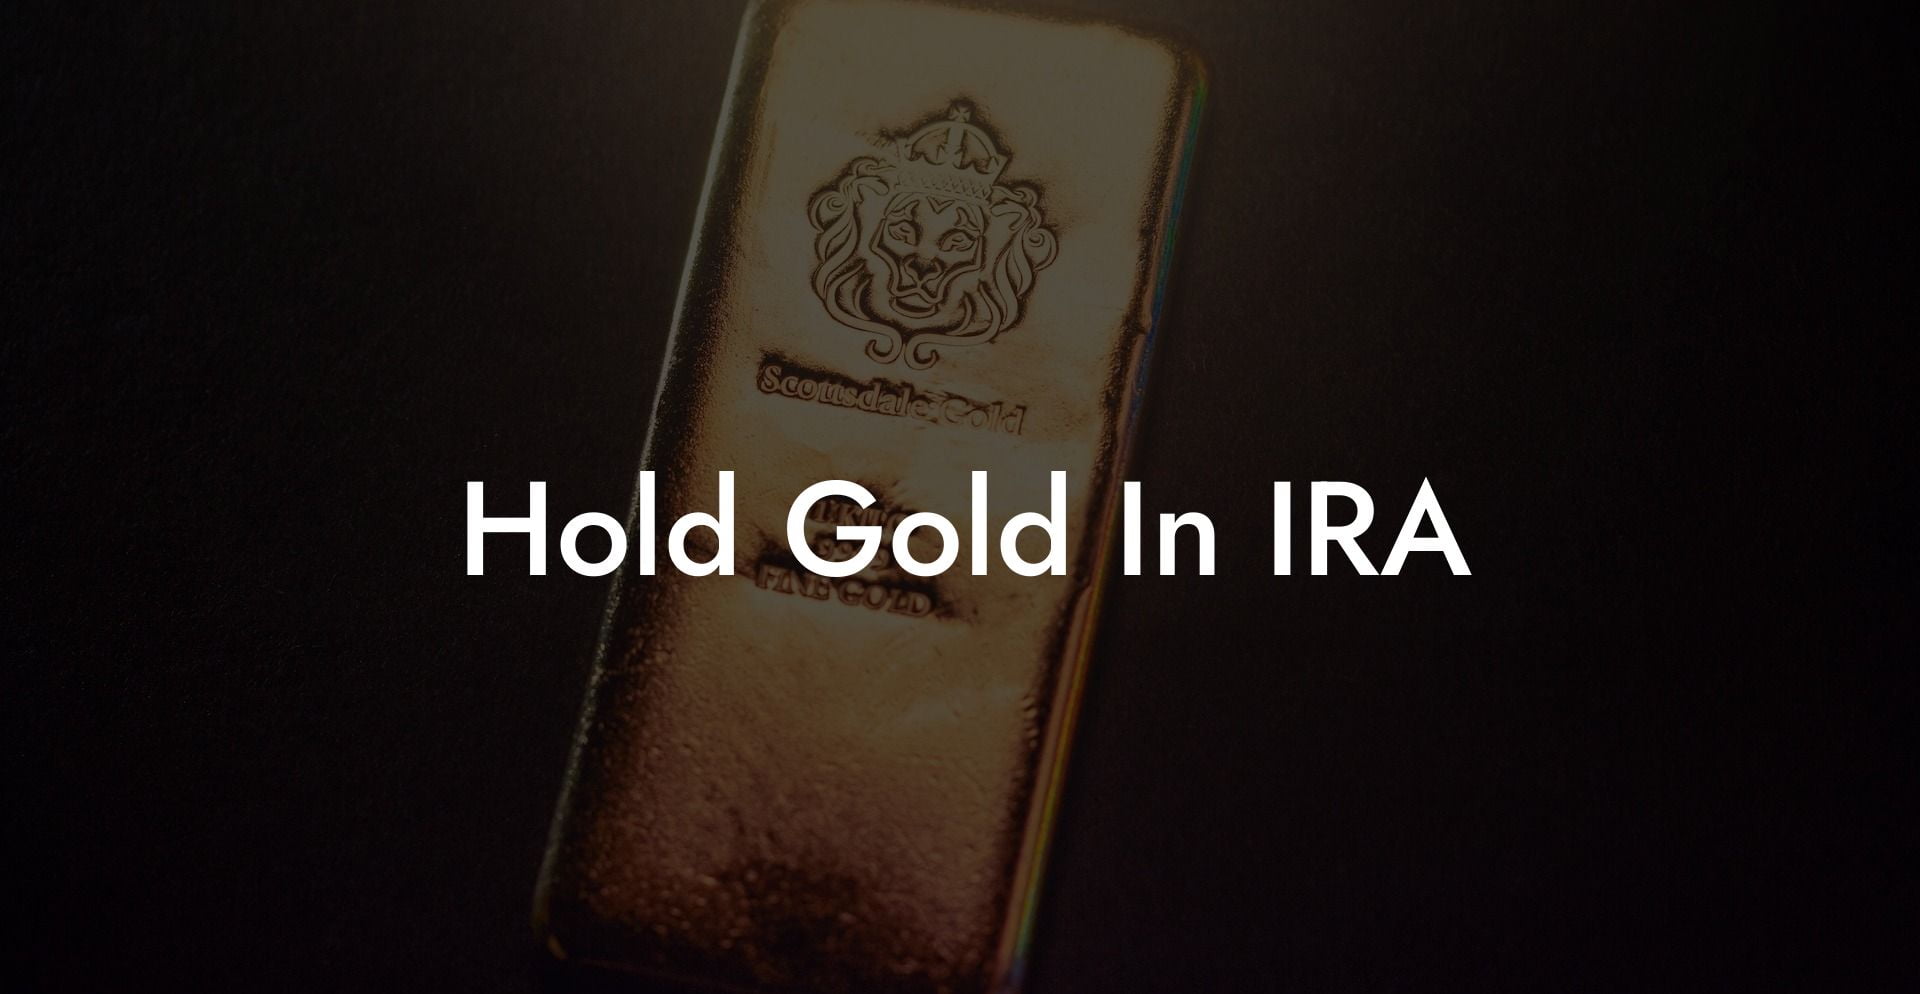 Hold Gold In IRA